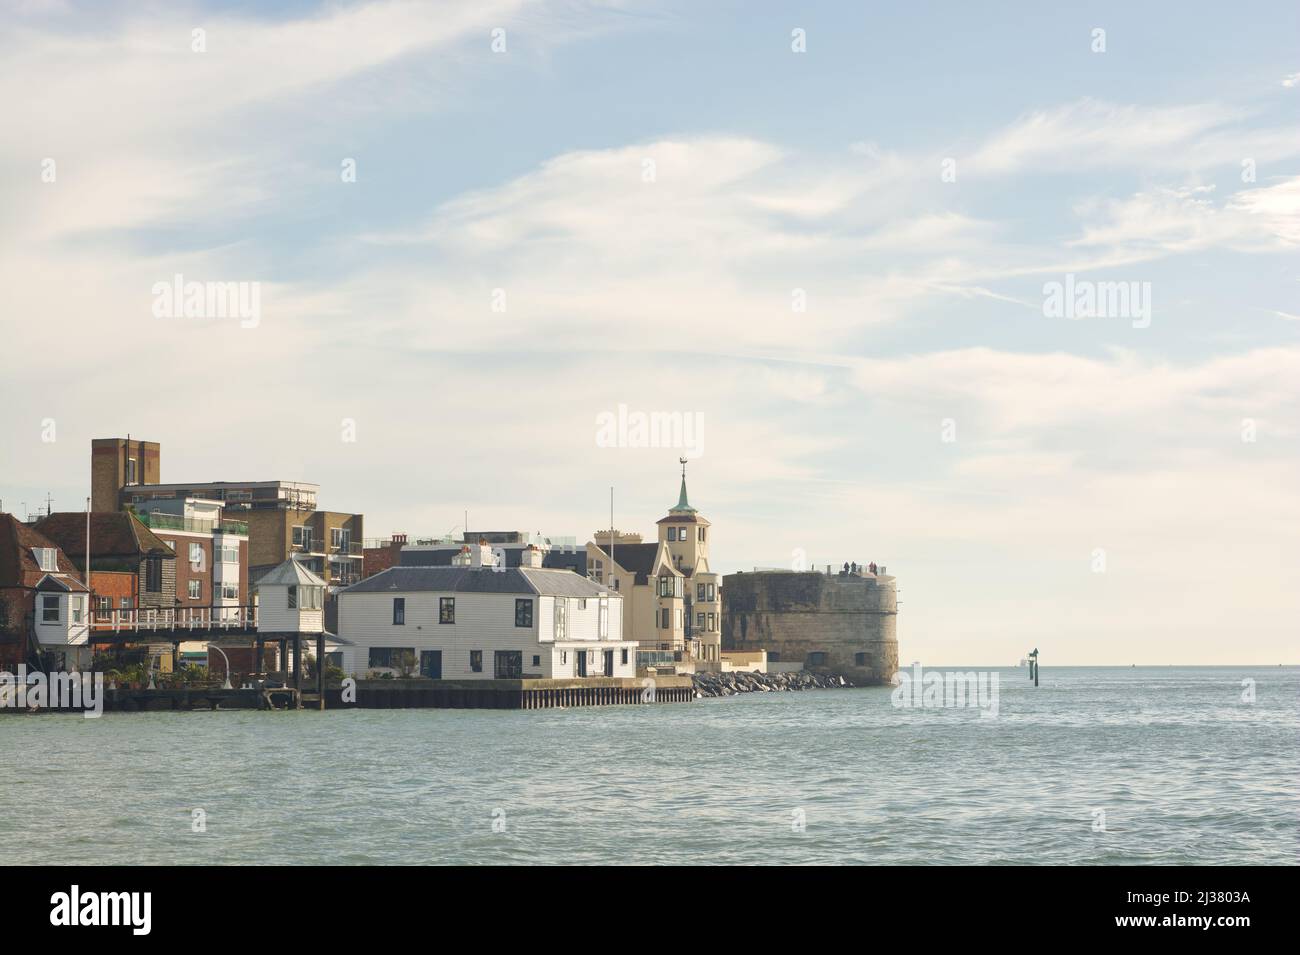 Houses and buildings at the entrance to harbour, Portsmouth, Hampshire, England. Viewed from boat on the water. Stock Photo